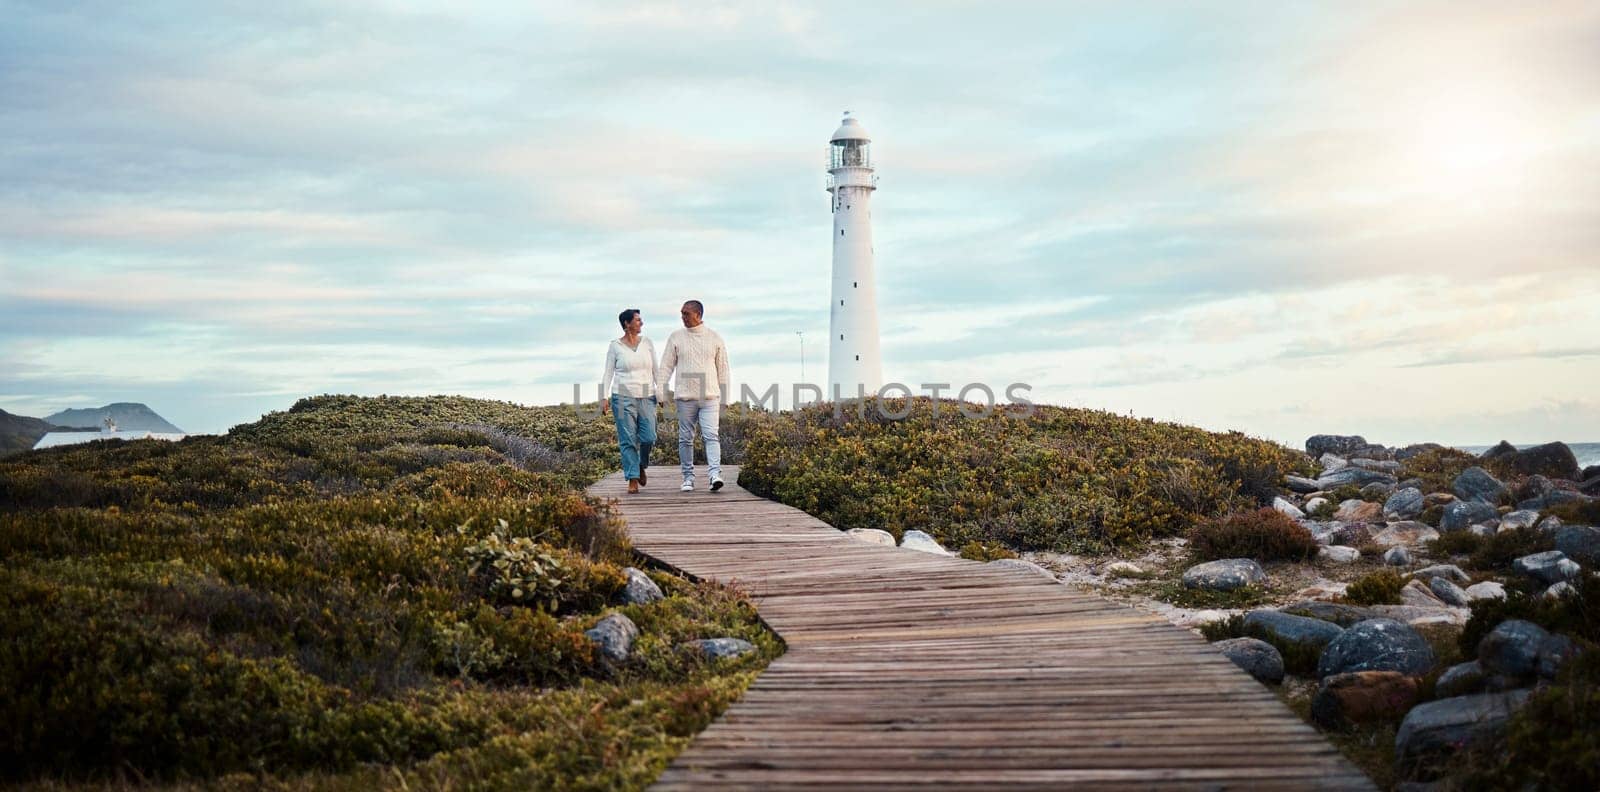 Romance, love and a couple holding hands while walking on the beach with a lighthouse in the background. Nature, view or blue sky mockup with a man and woman taking a romantic walk outside together by YuriArcurs